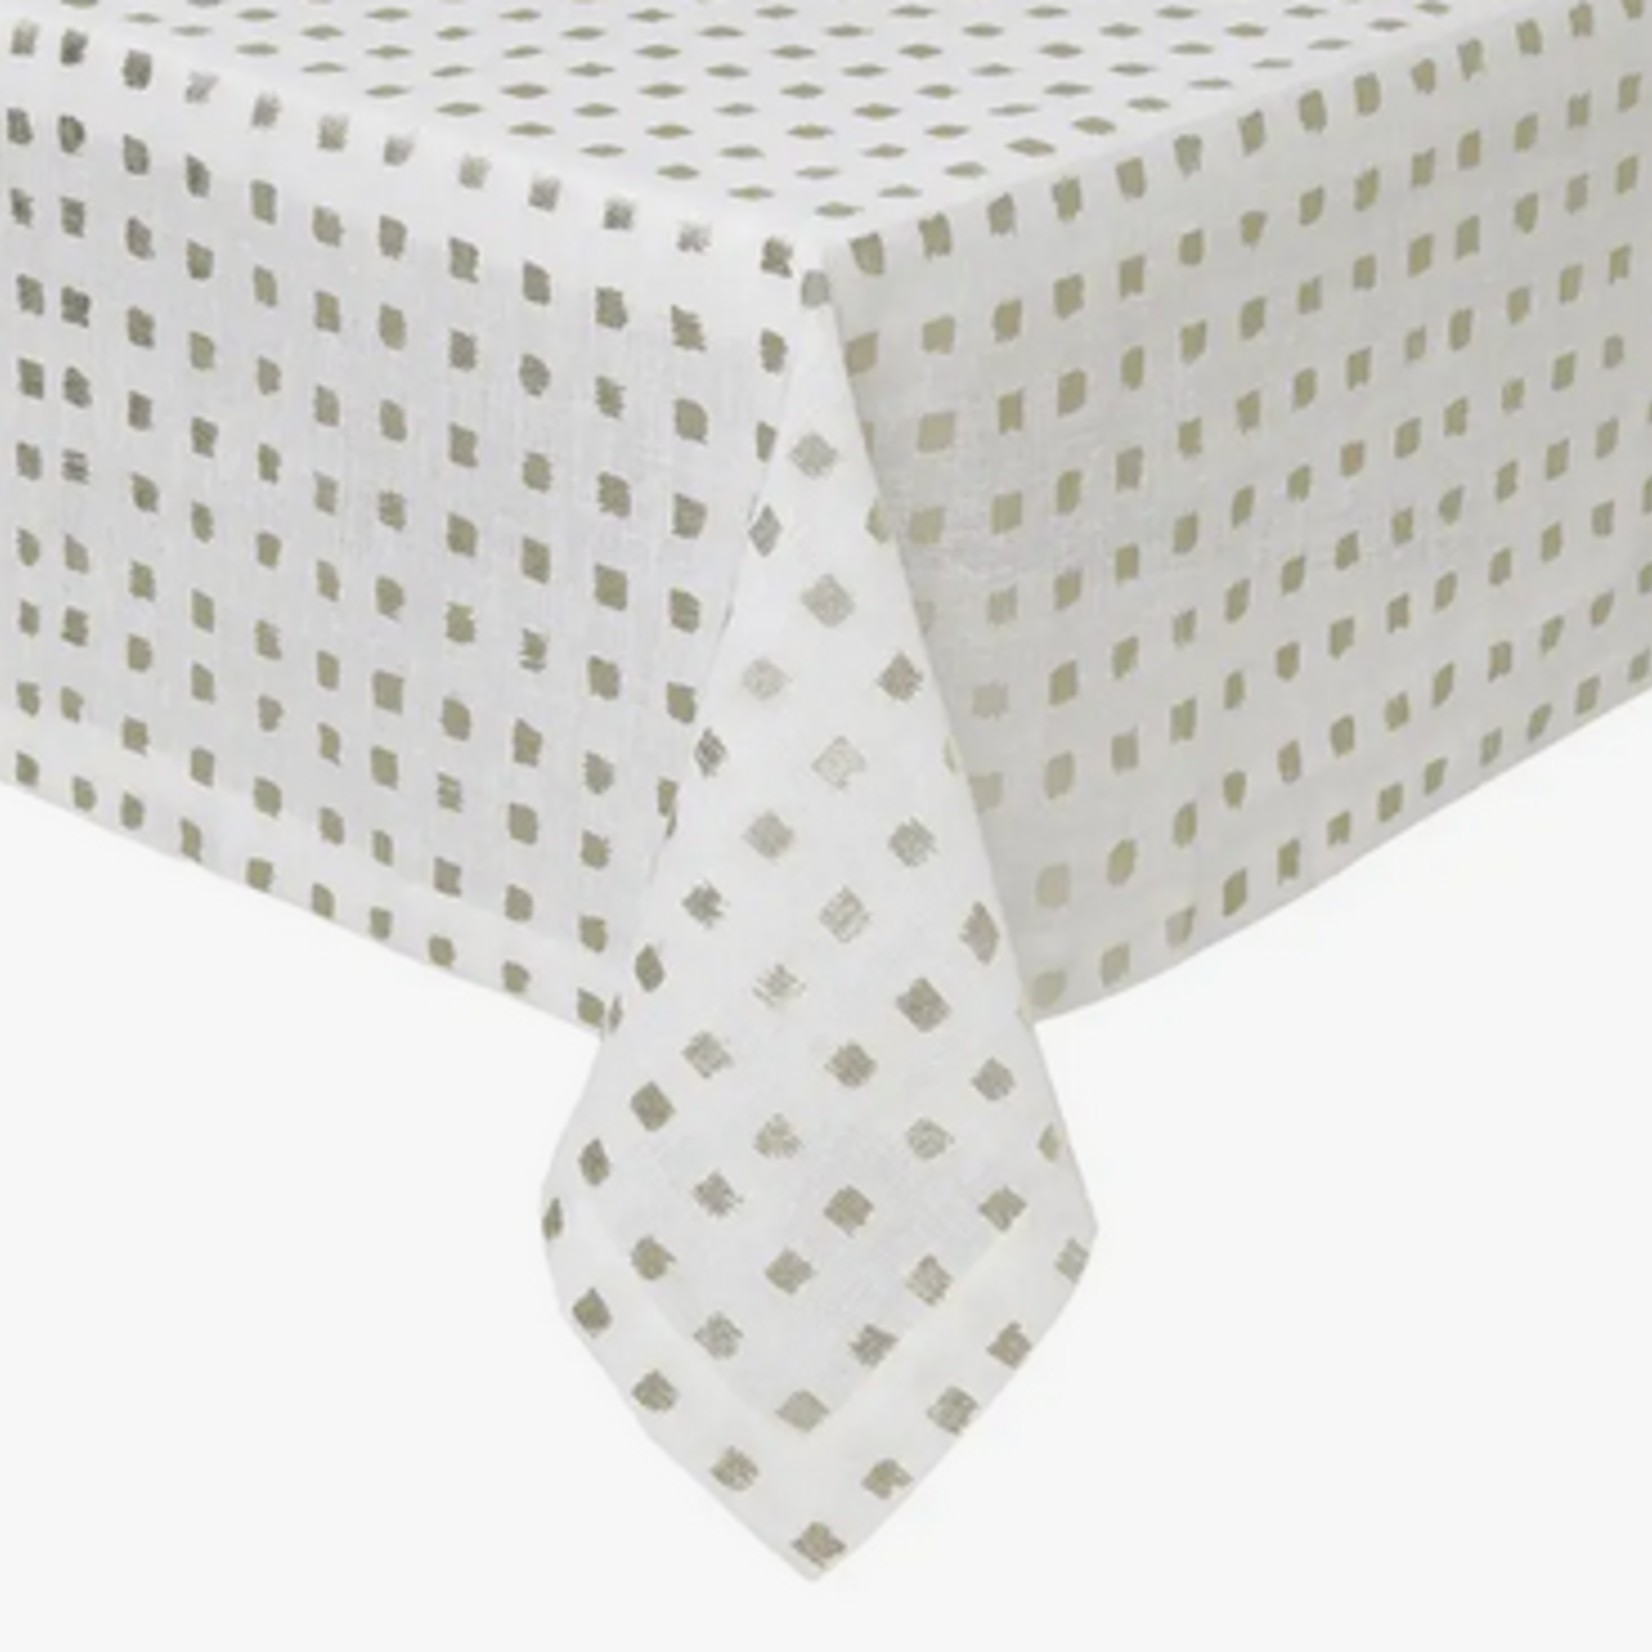 Antibes Tablecloth